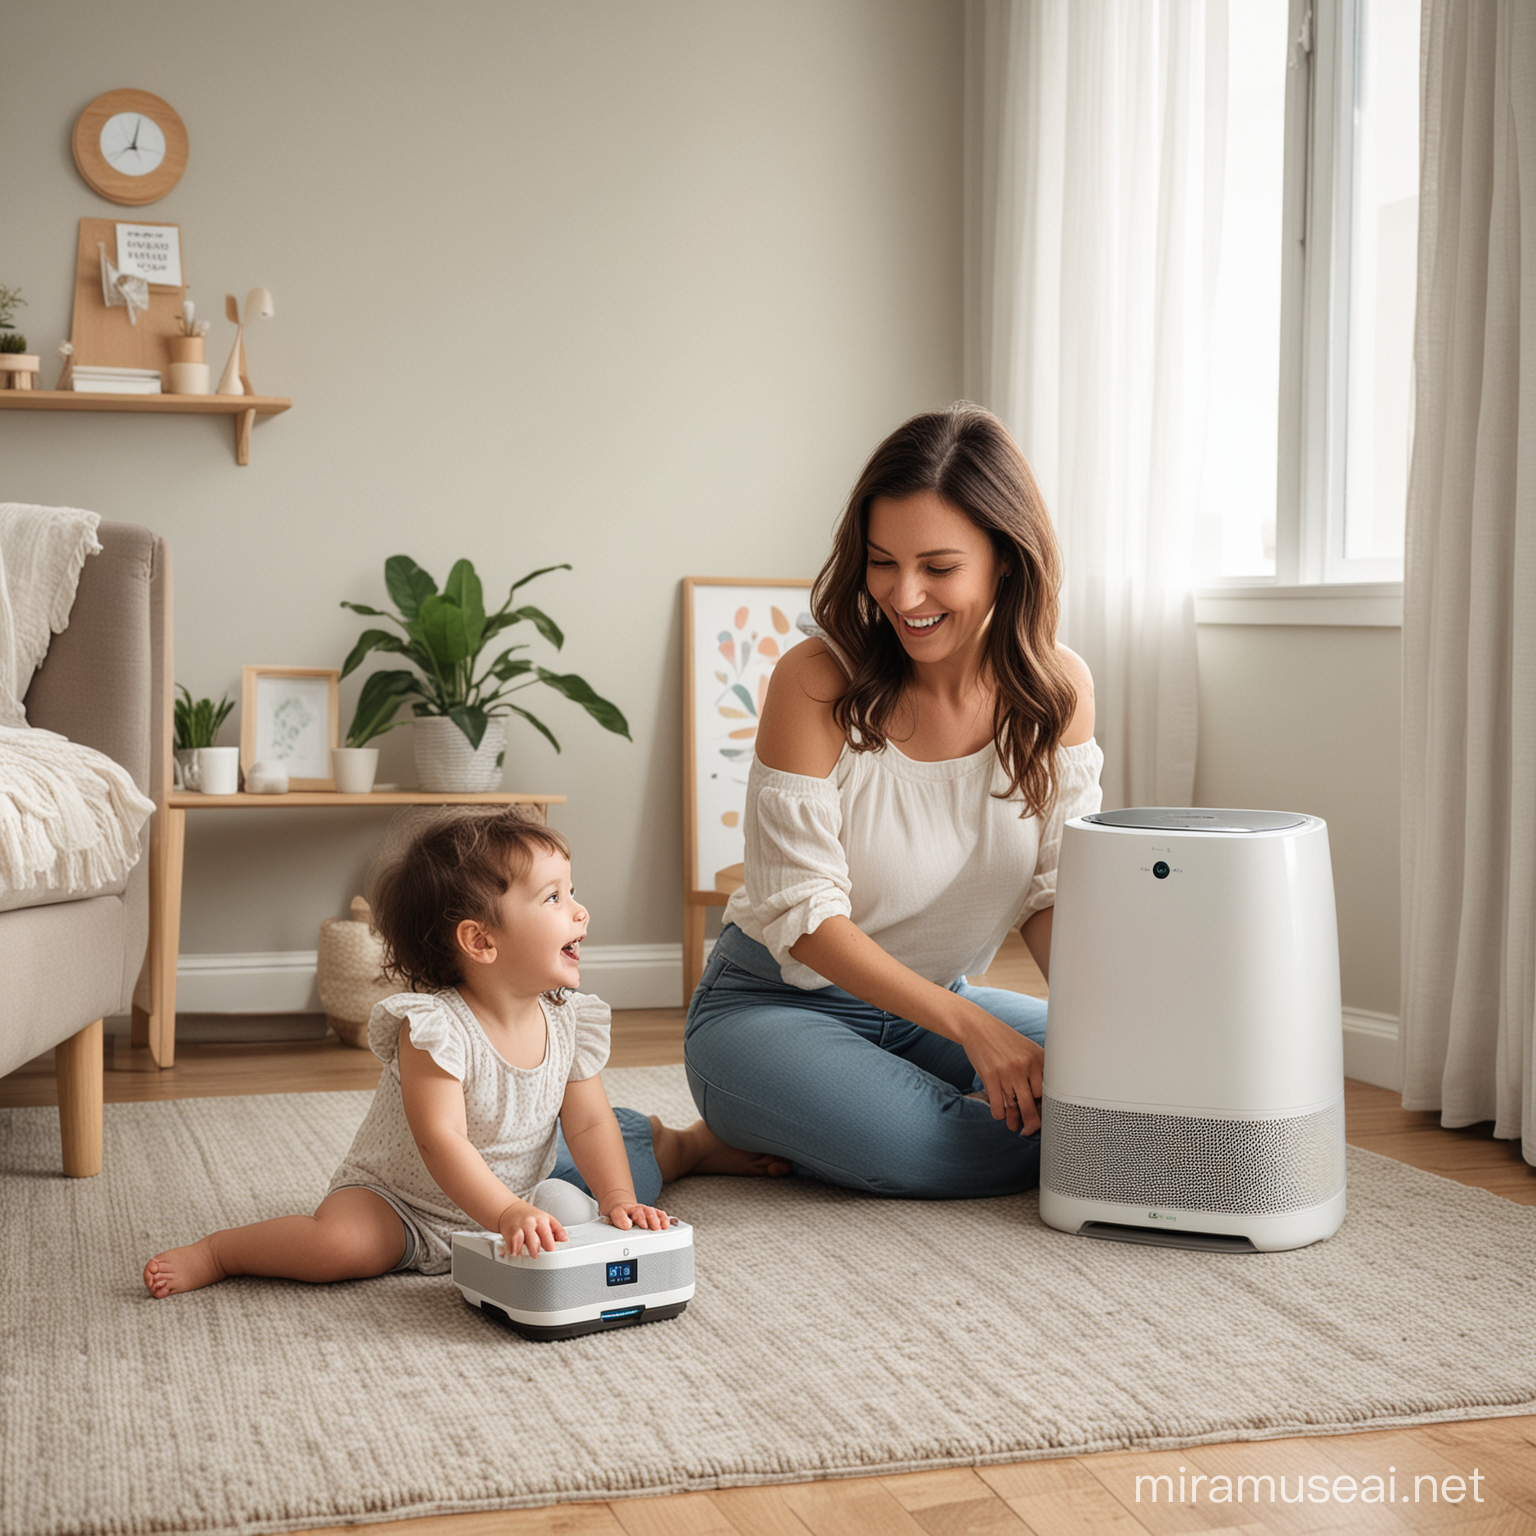 A mother and her toddler playing happily in a roon with clean air equiped with air purifier device